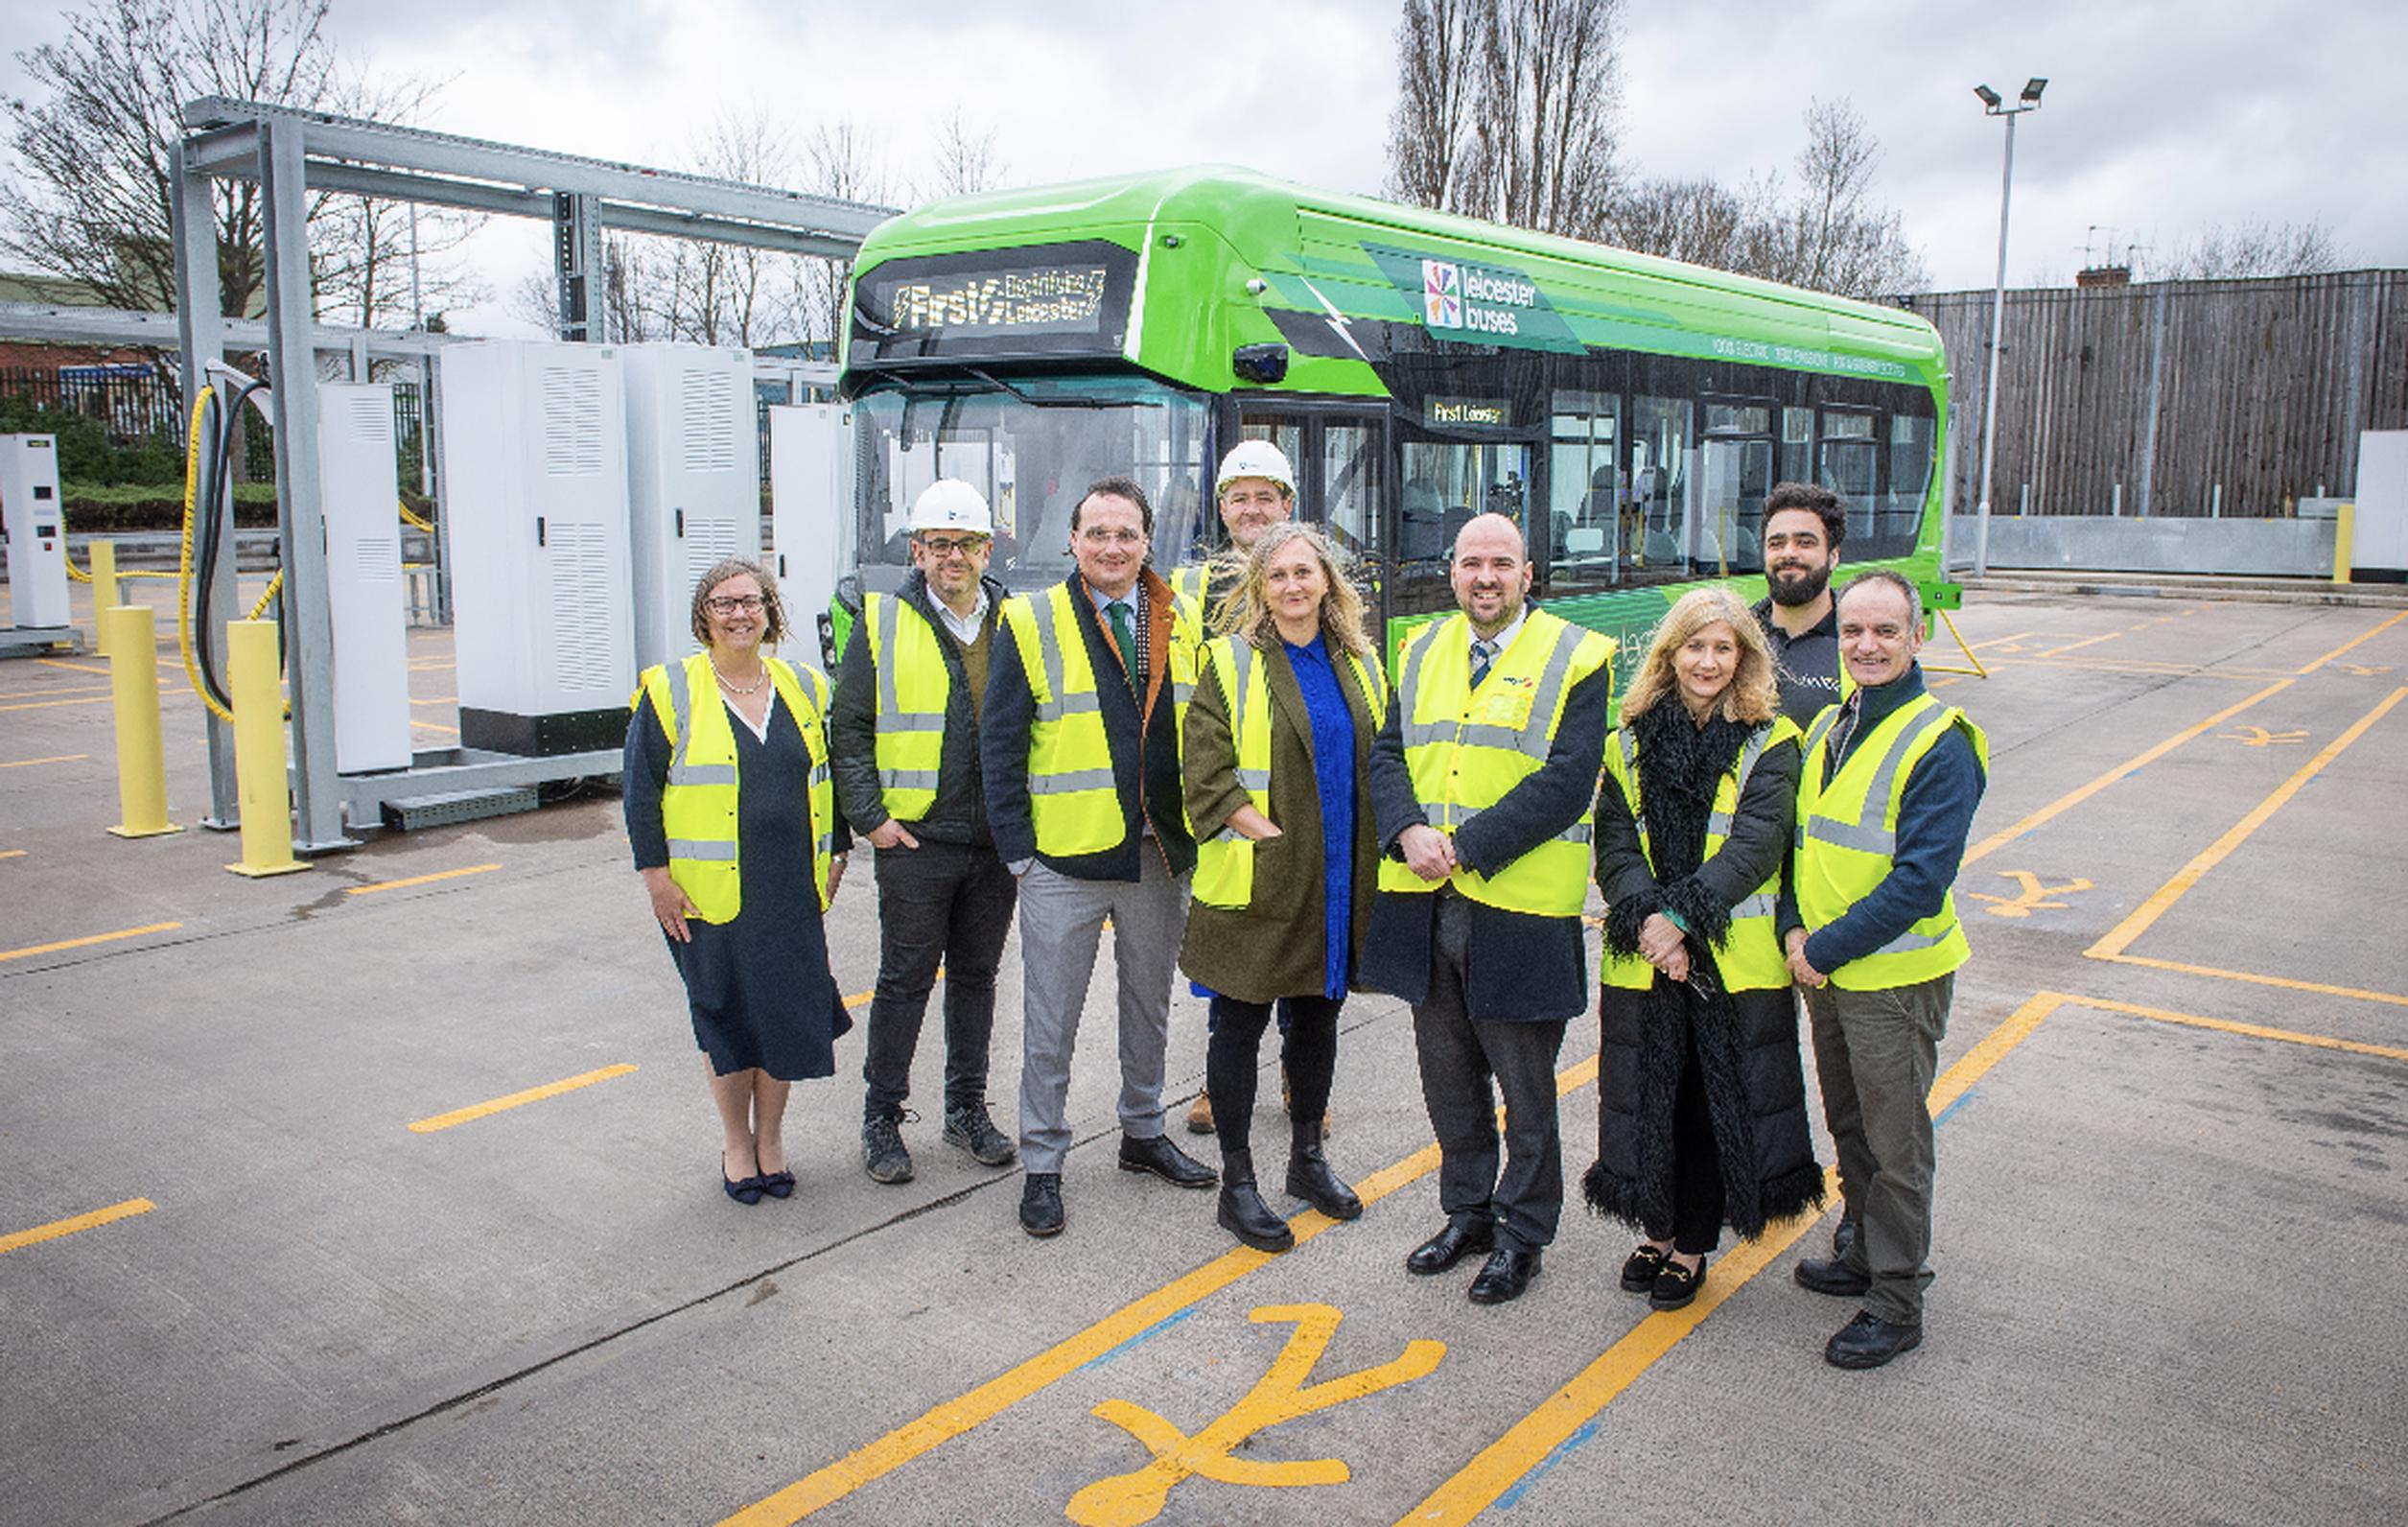 Launching the First Bus hub in Leicester